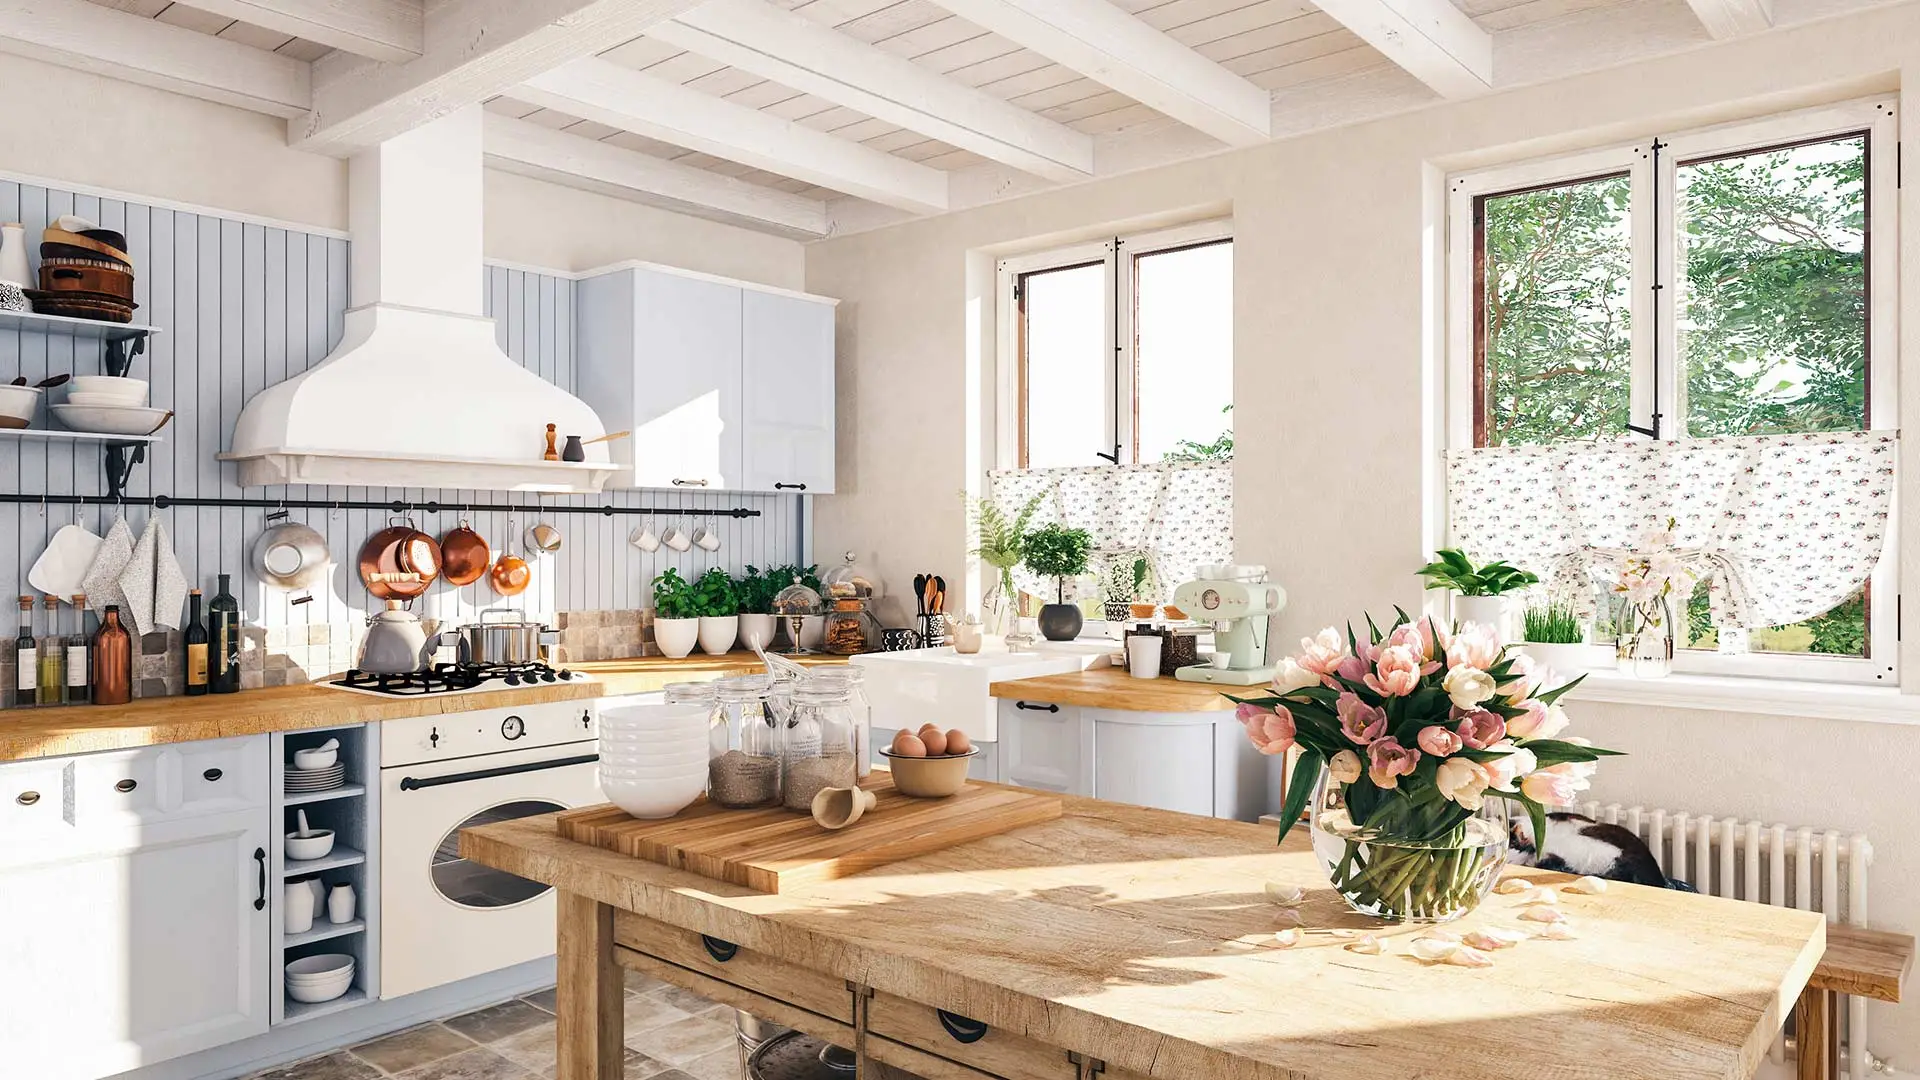 3 Outdated Kitchen Trends Making a Comeback